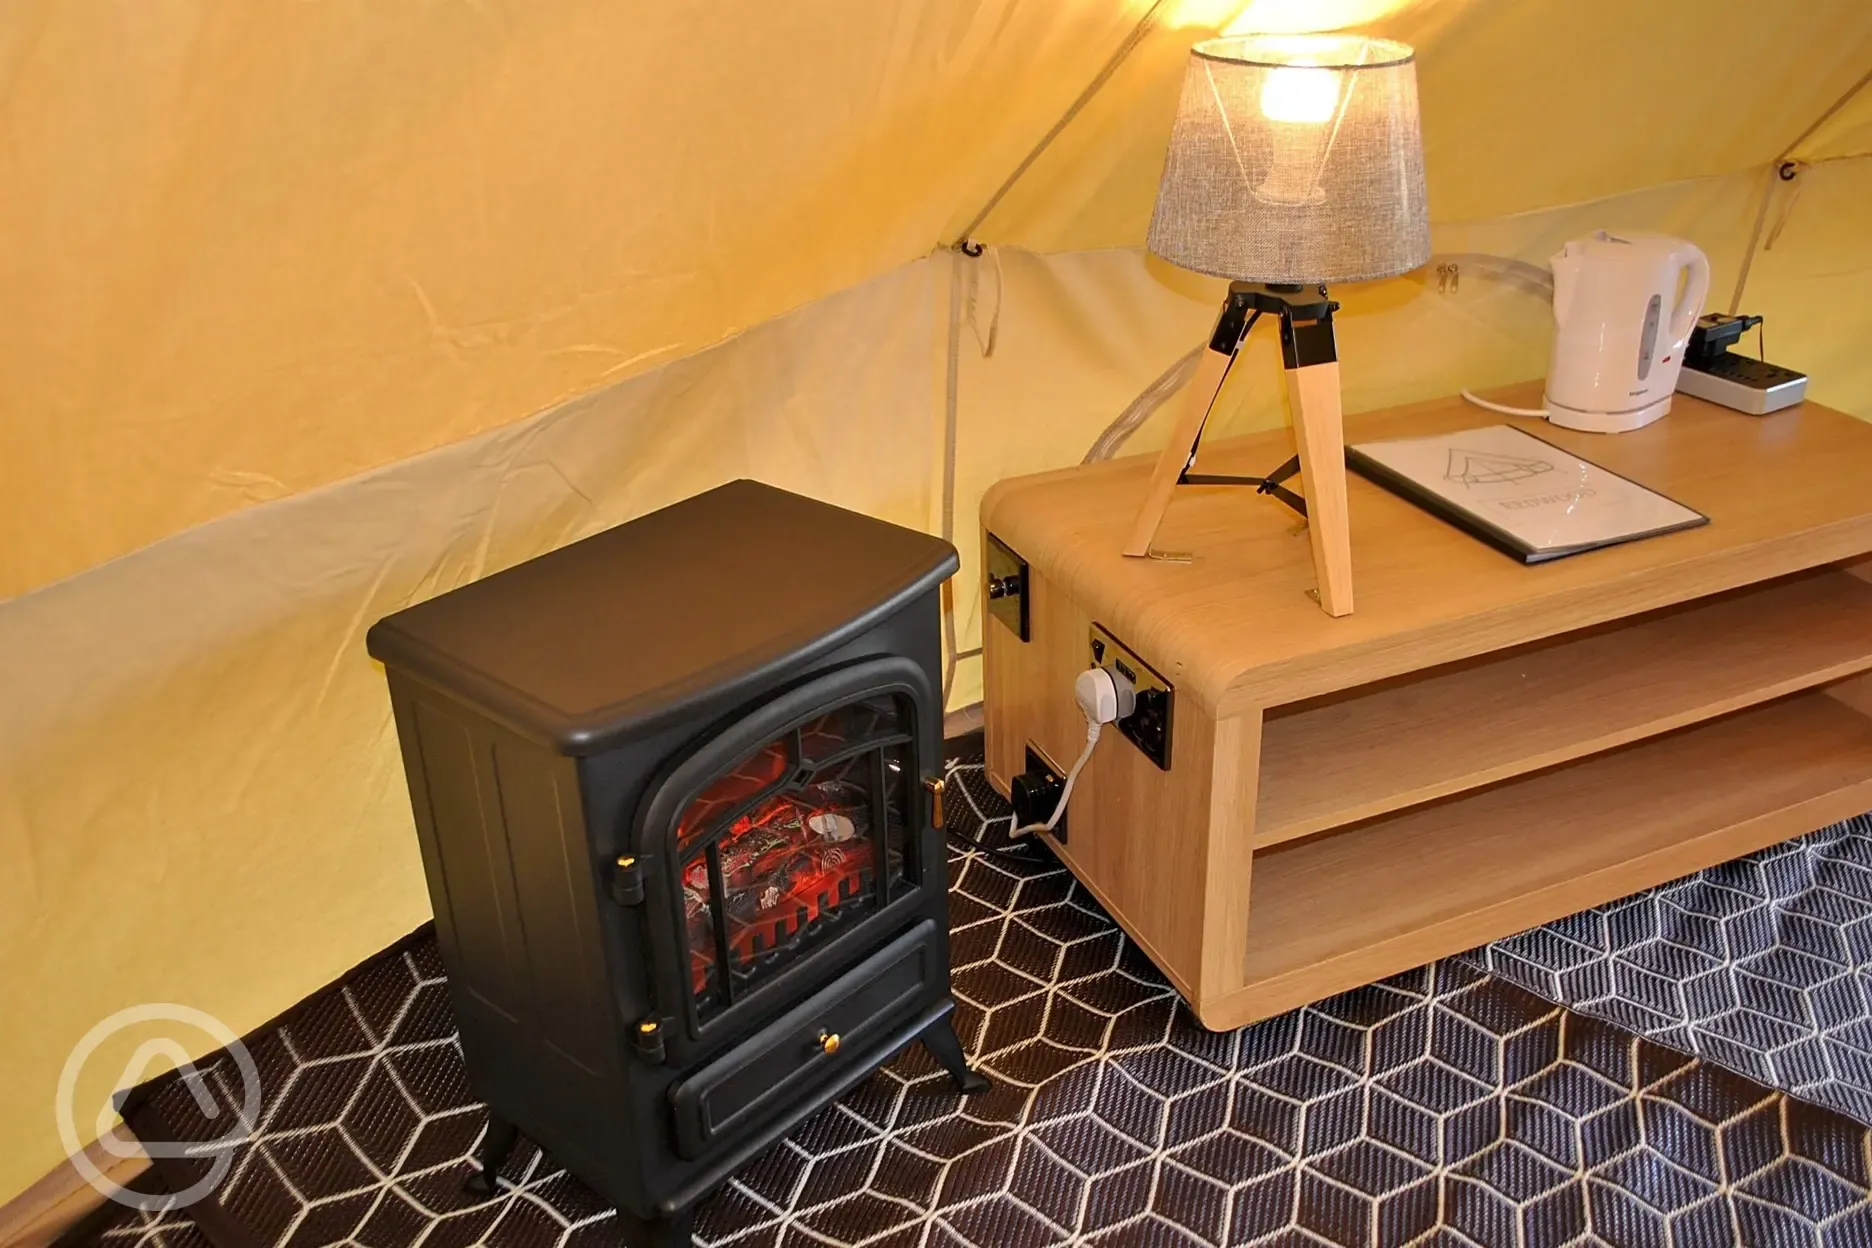 Bell tent bedside table and heater